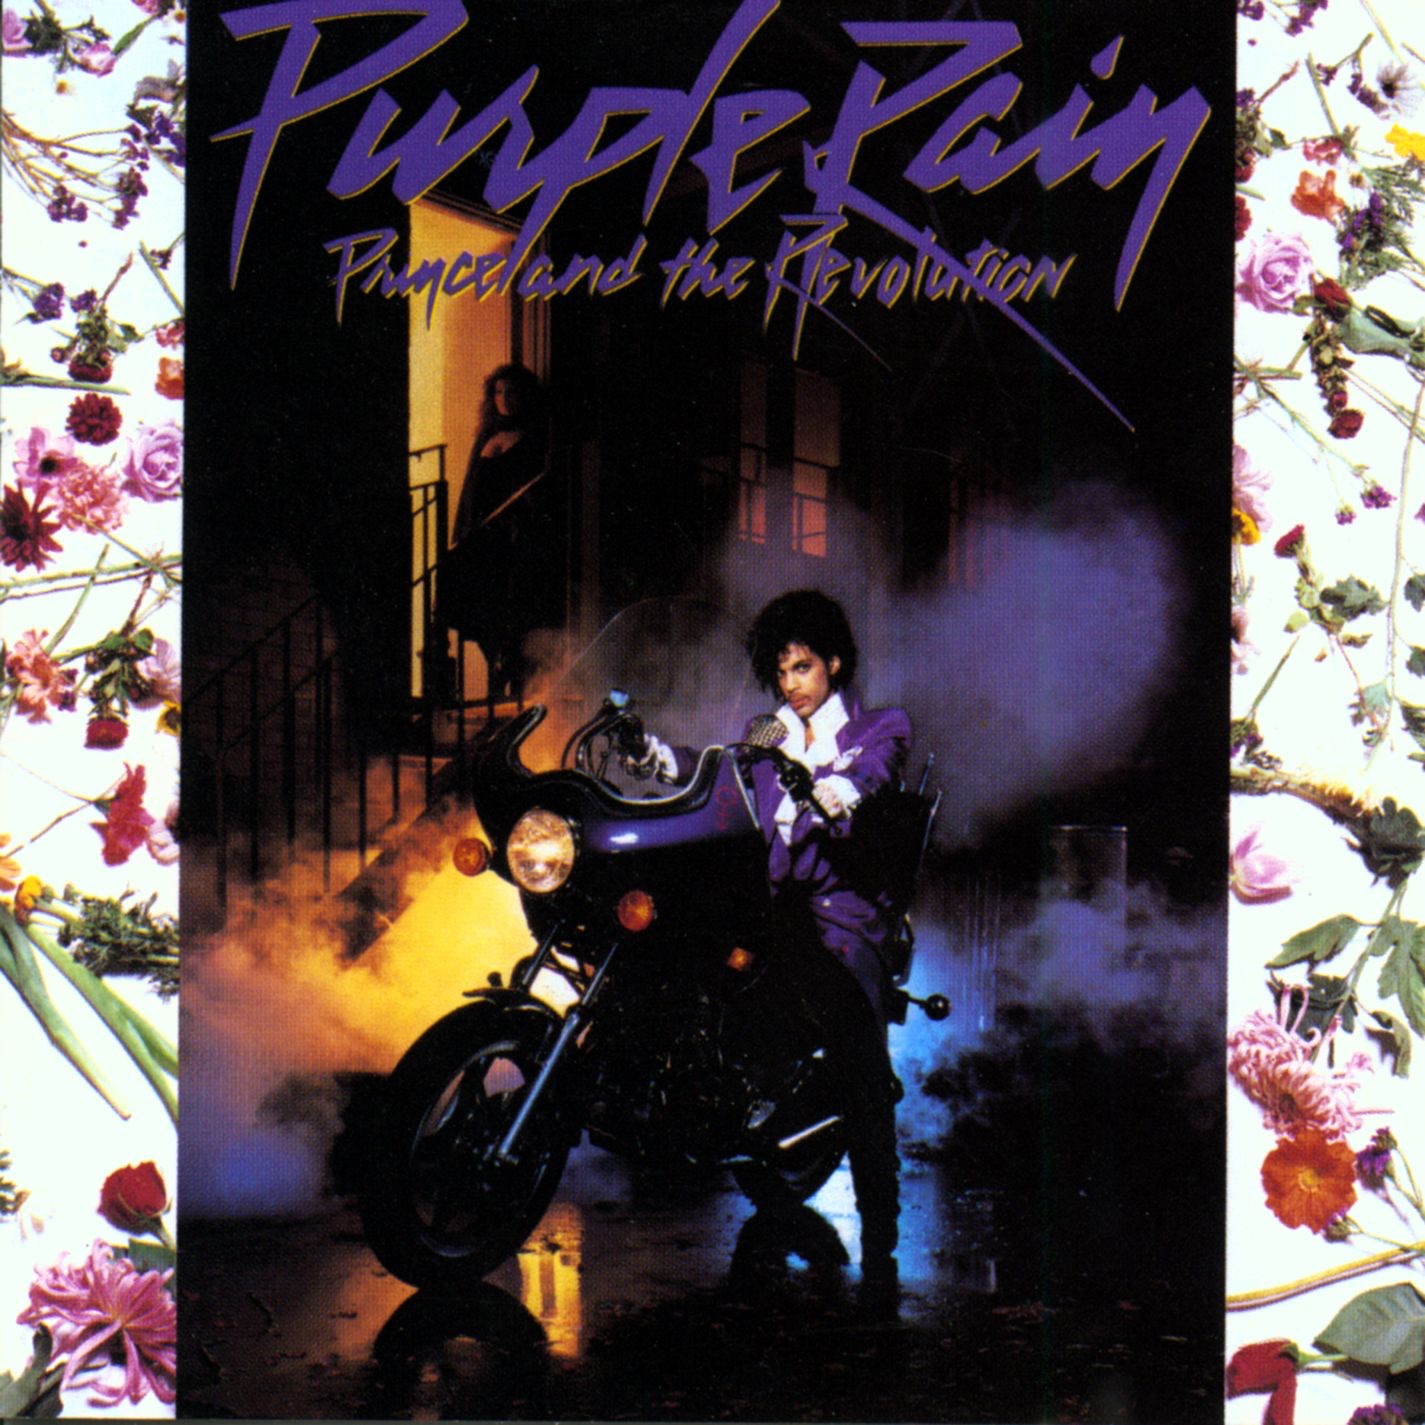 Art for When Doves Cry by Prince & The Revolution